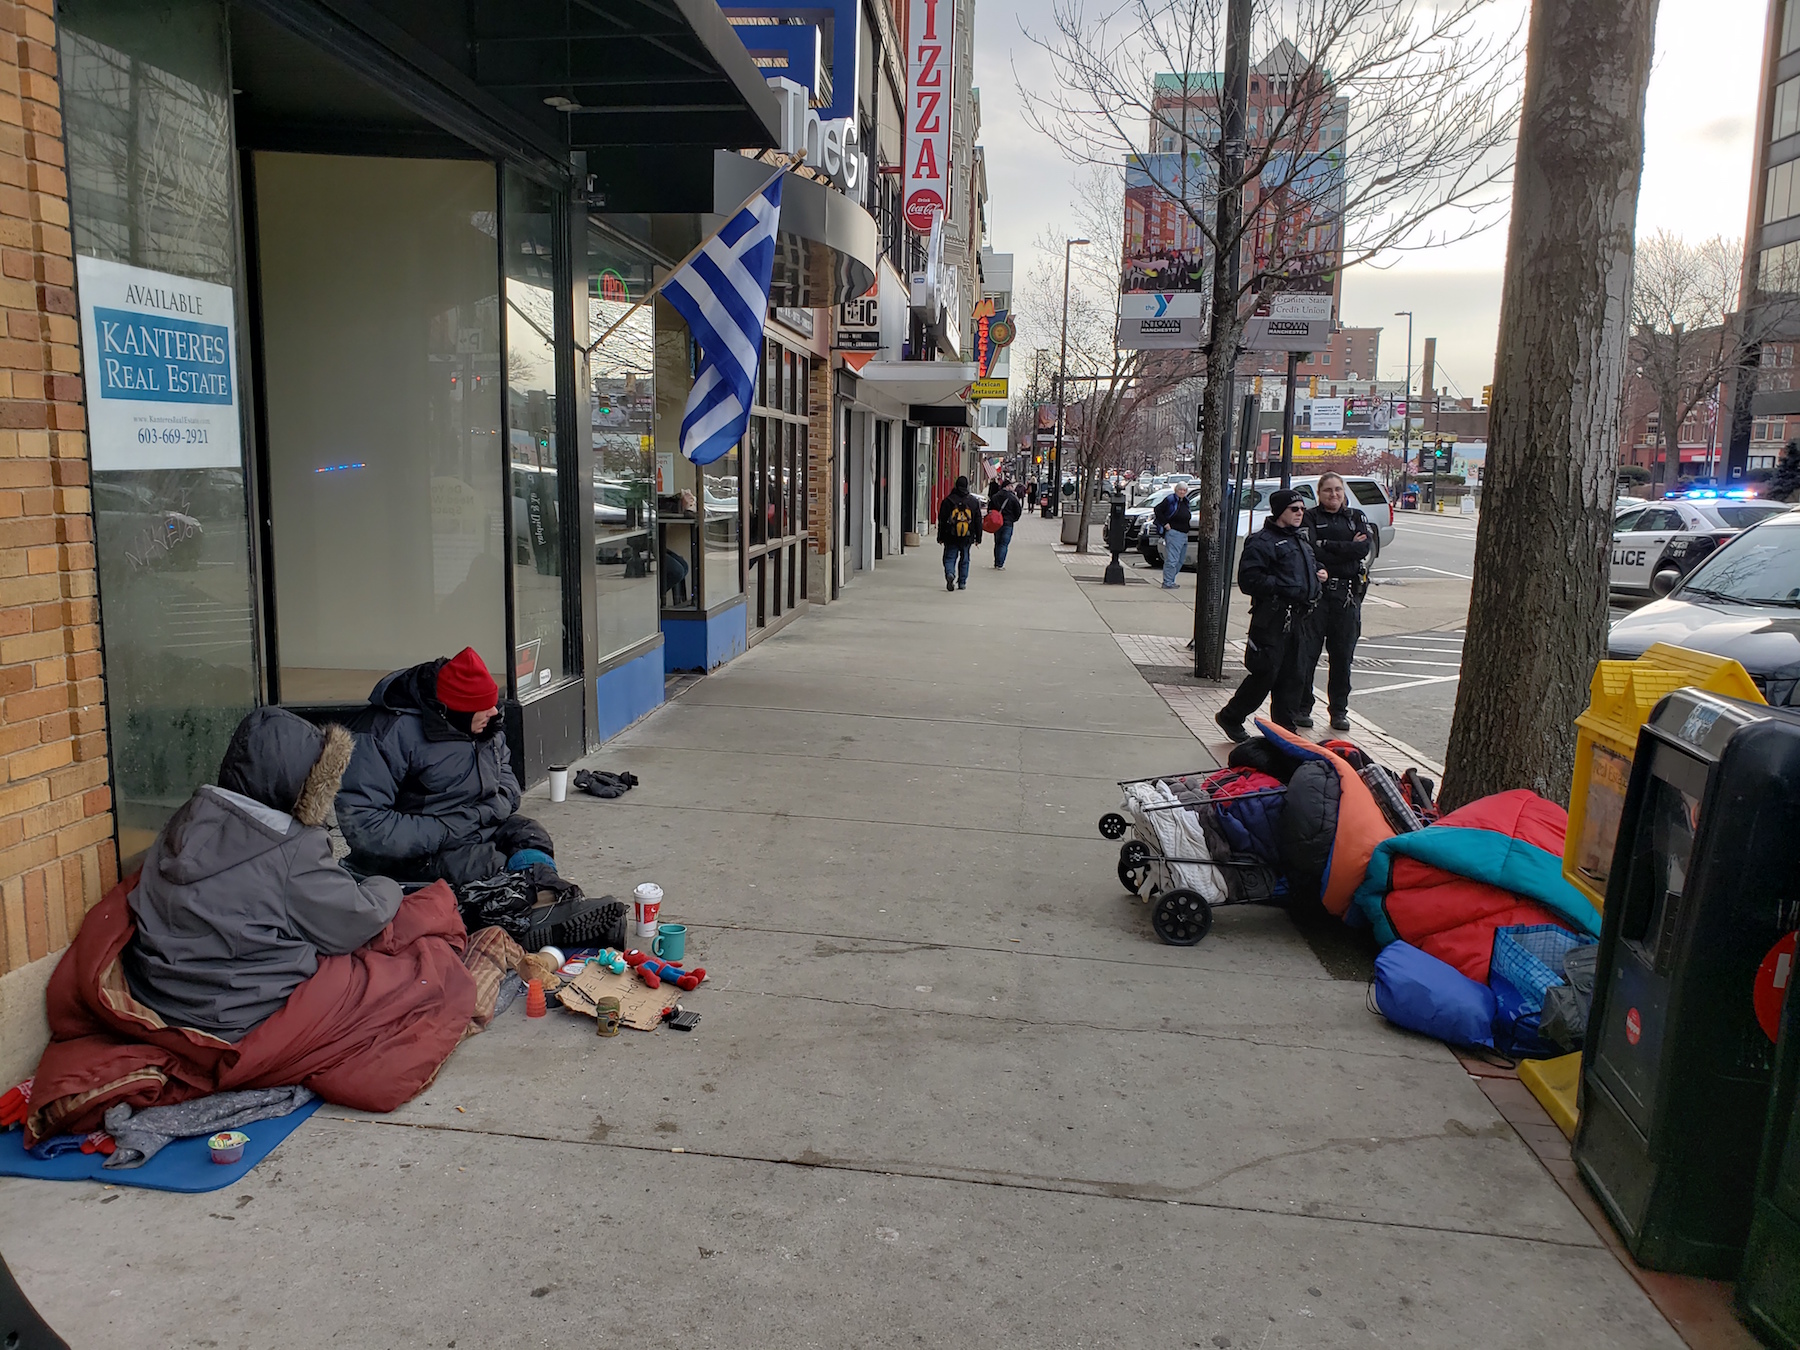 Homelessness in MHT Enough talking … it’s time to take action